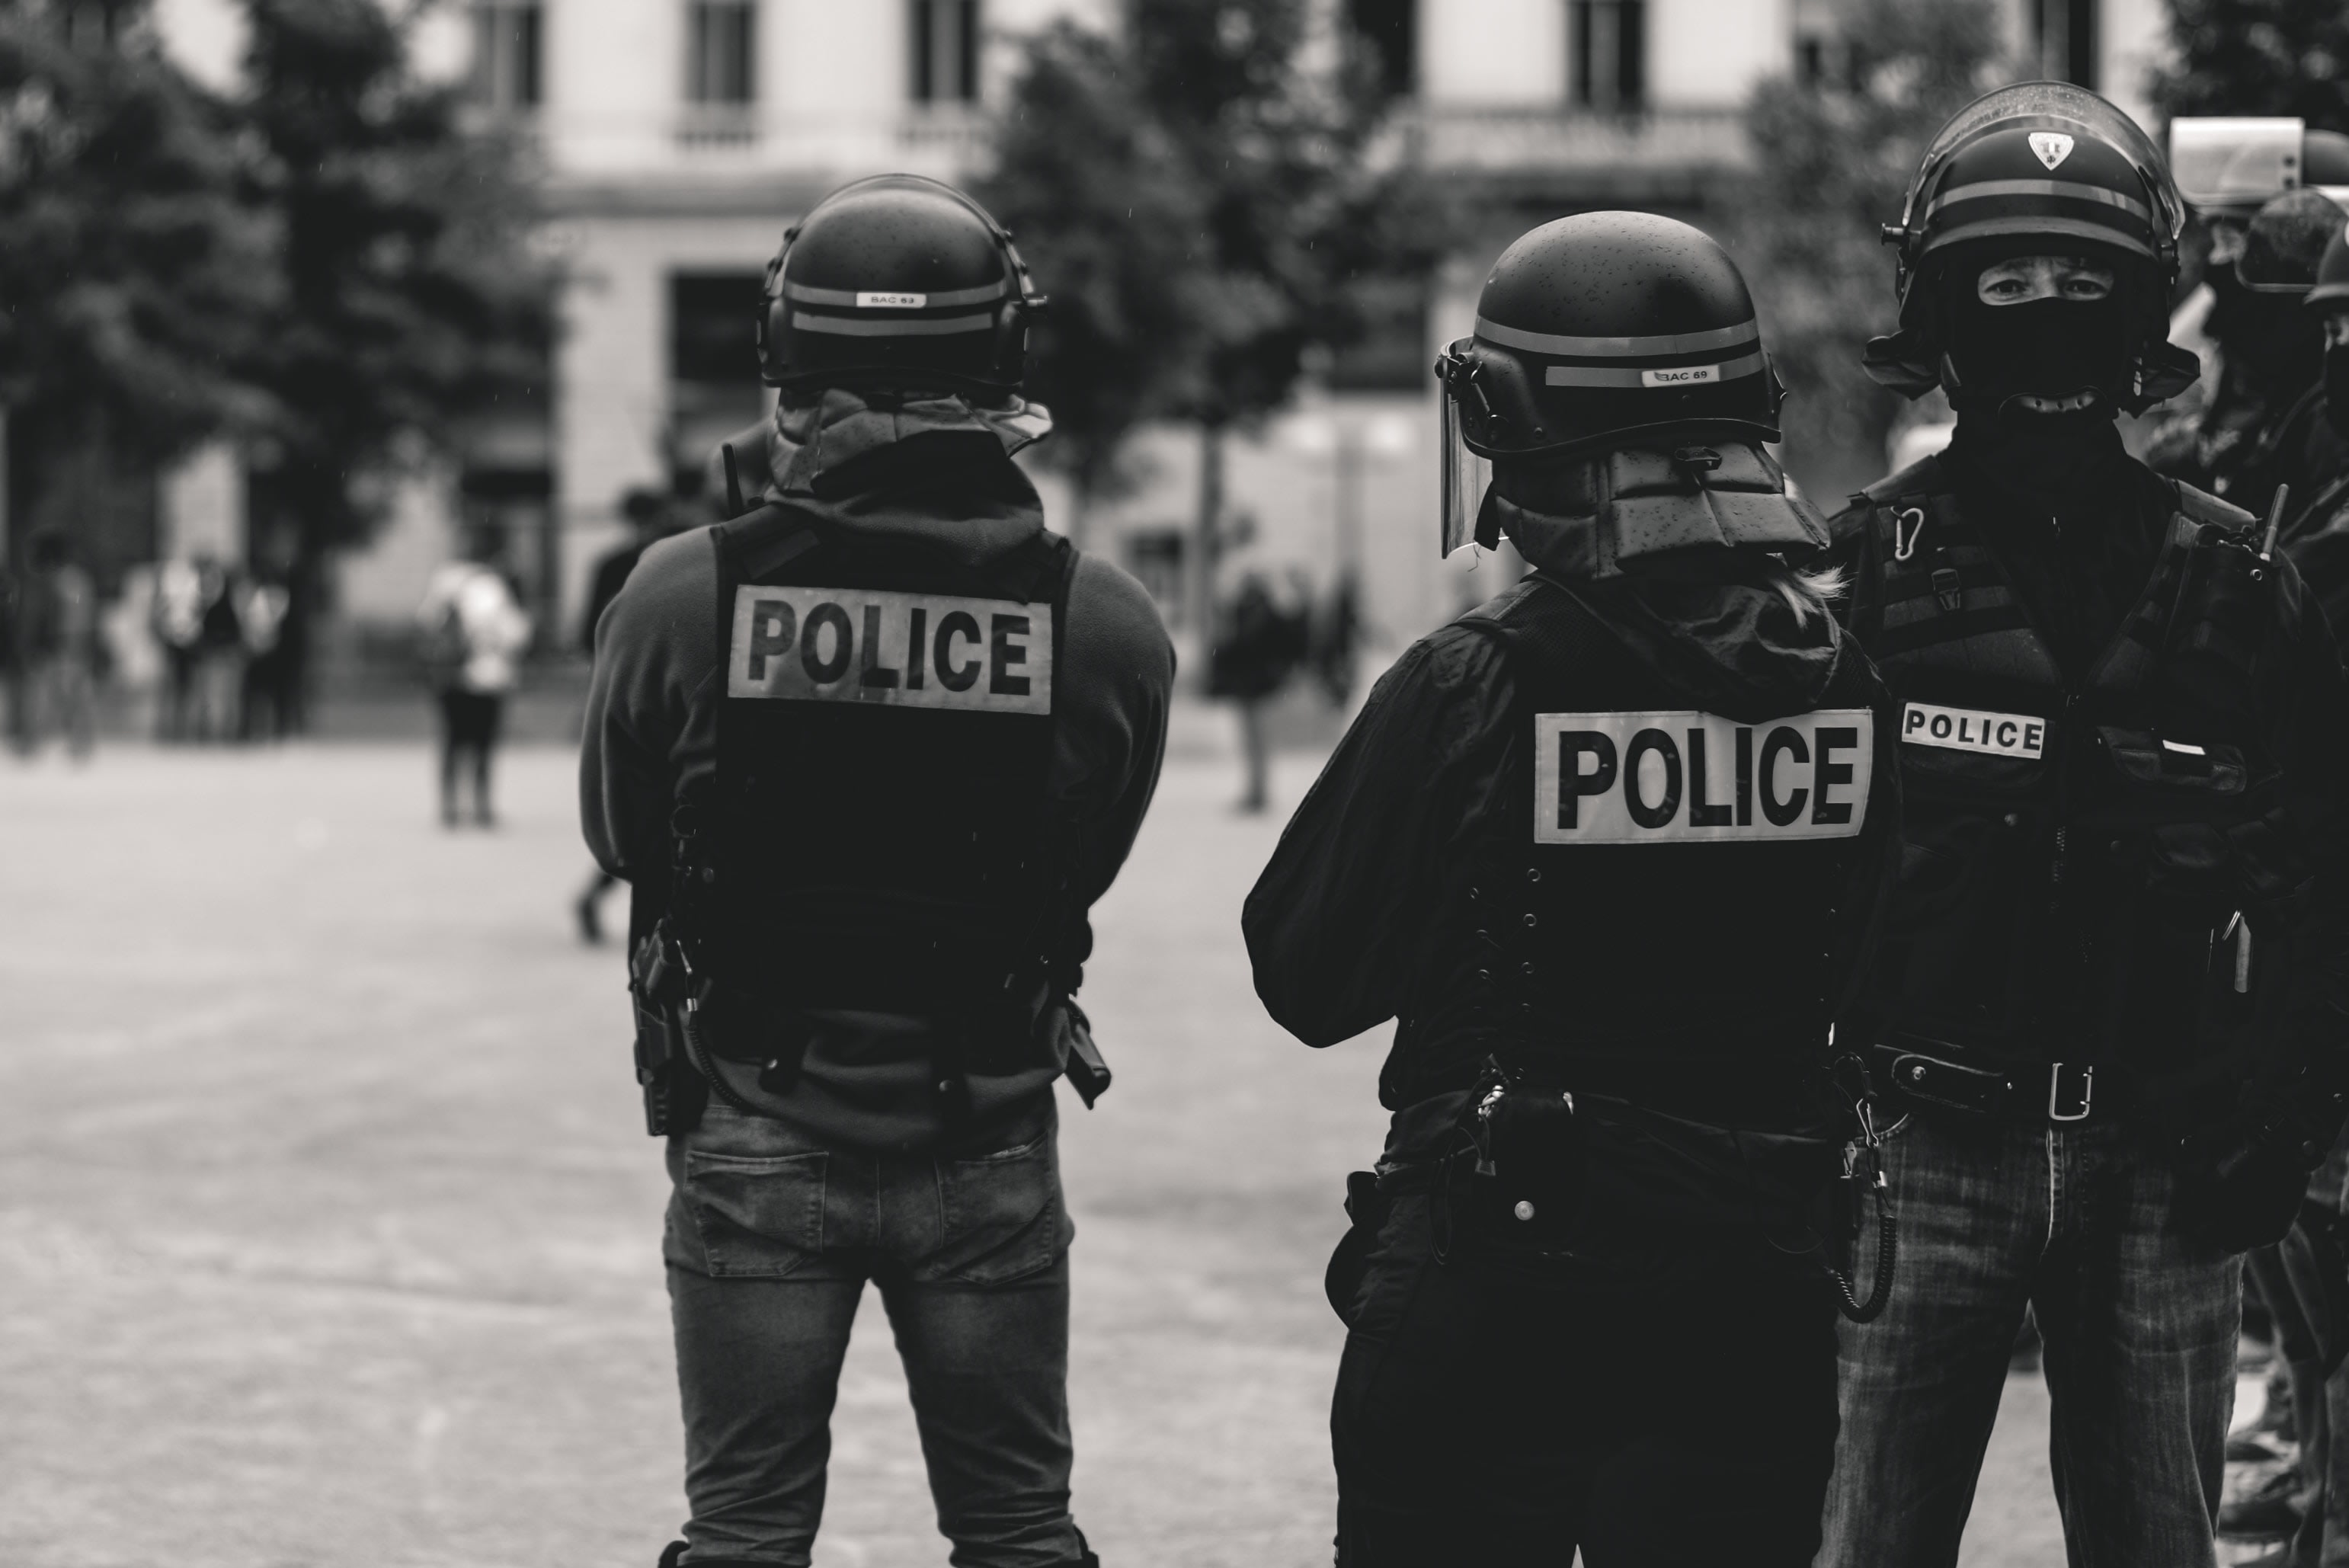 High police presence in Lyon, France, during the 25th weekend of the yellow vests movement. Police violence is at its highest since the 1950s. As of now, 23 protestors and bystanders have lost an eye and 5 persons their hand (source: mediapart.fr, http://tiny.cc/6hd85y) Recently an independant journalist, got arrested (https://twitter.com/GaspardGlanz). Violence continues, even though Amnesty International and the UN condemn the use of excessive force against protesters (source: amnesty.org, http://tiny.cc/3jd85y).